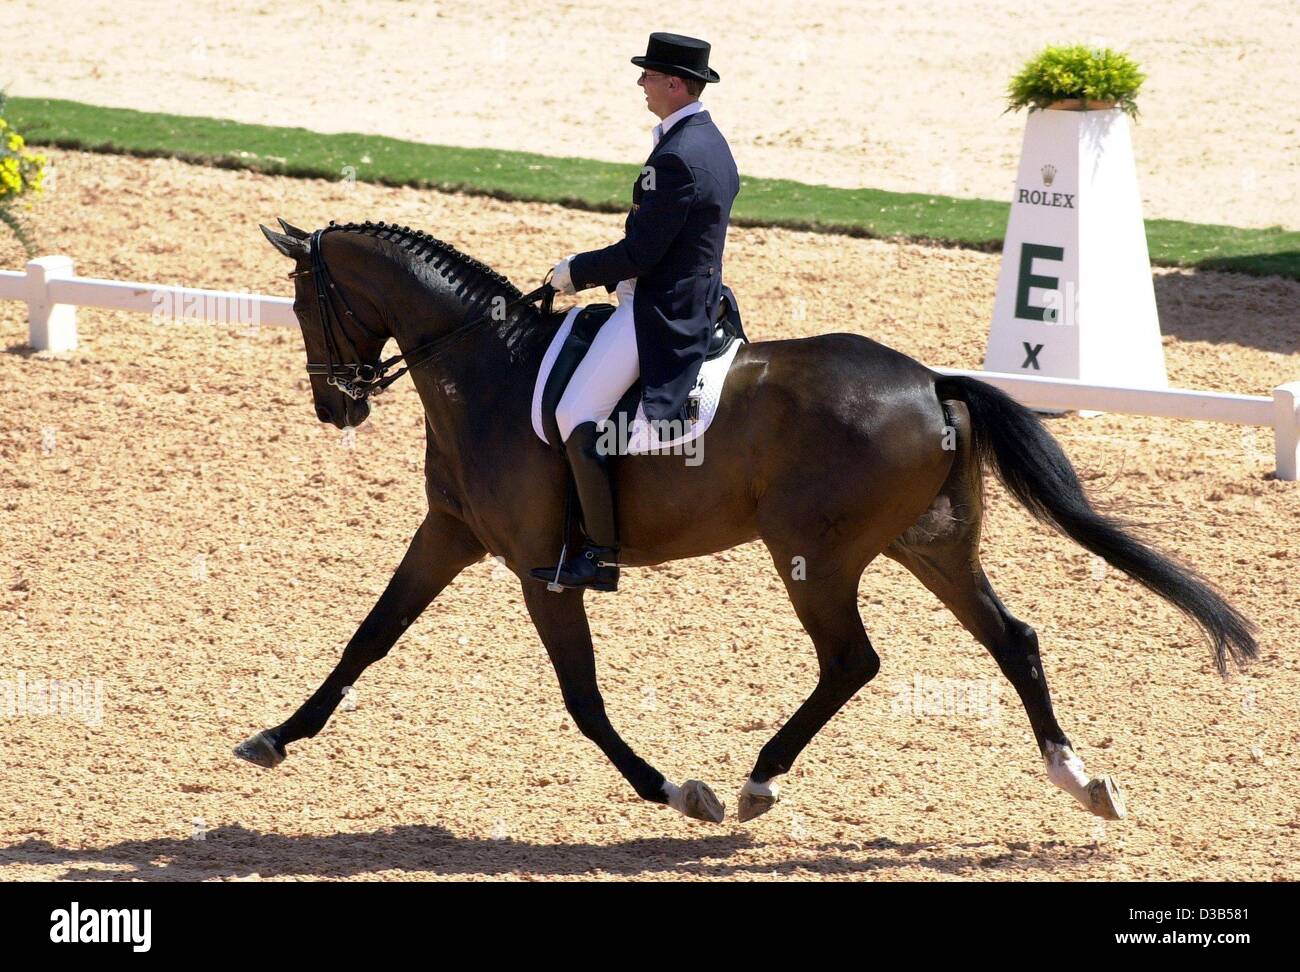 (dpa) - German rider Klaus Husenbeth performs with his horse 'Piccolino' during the dressage event at the World Equestrian Games in Jerez, Spain, 13 September 2002. Stock Photo